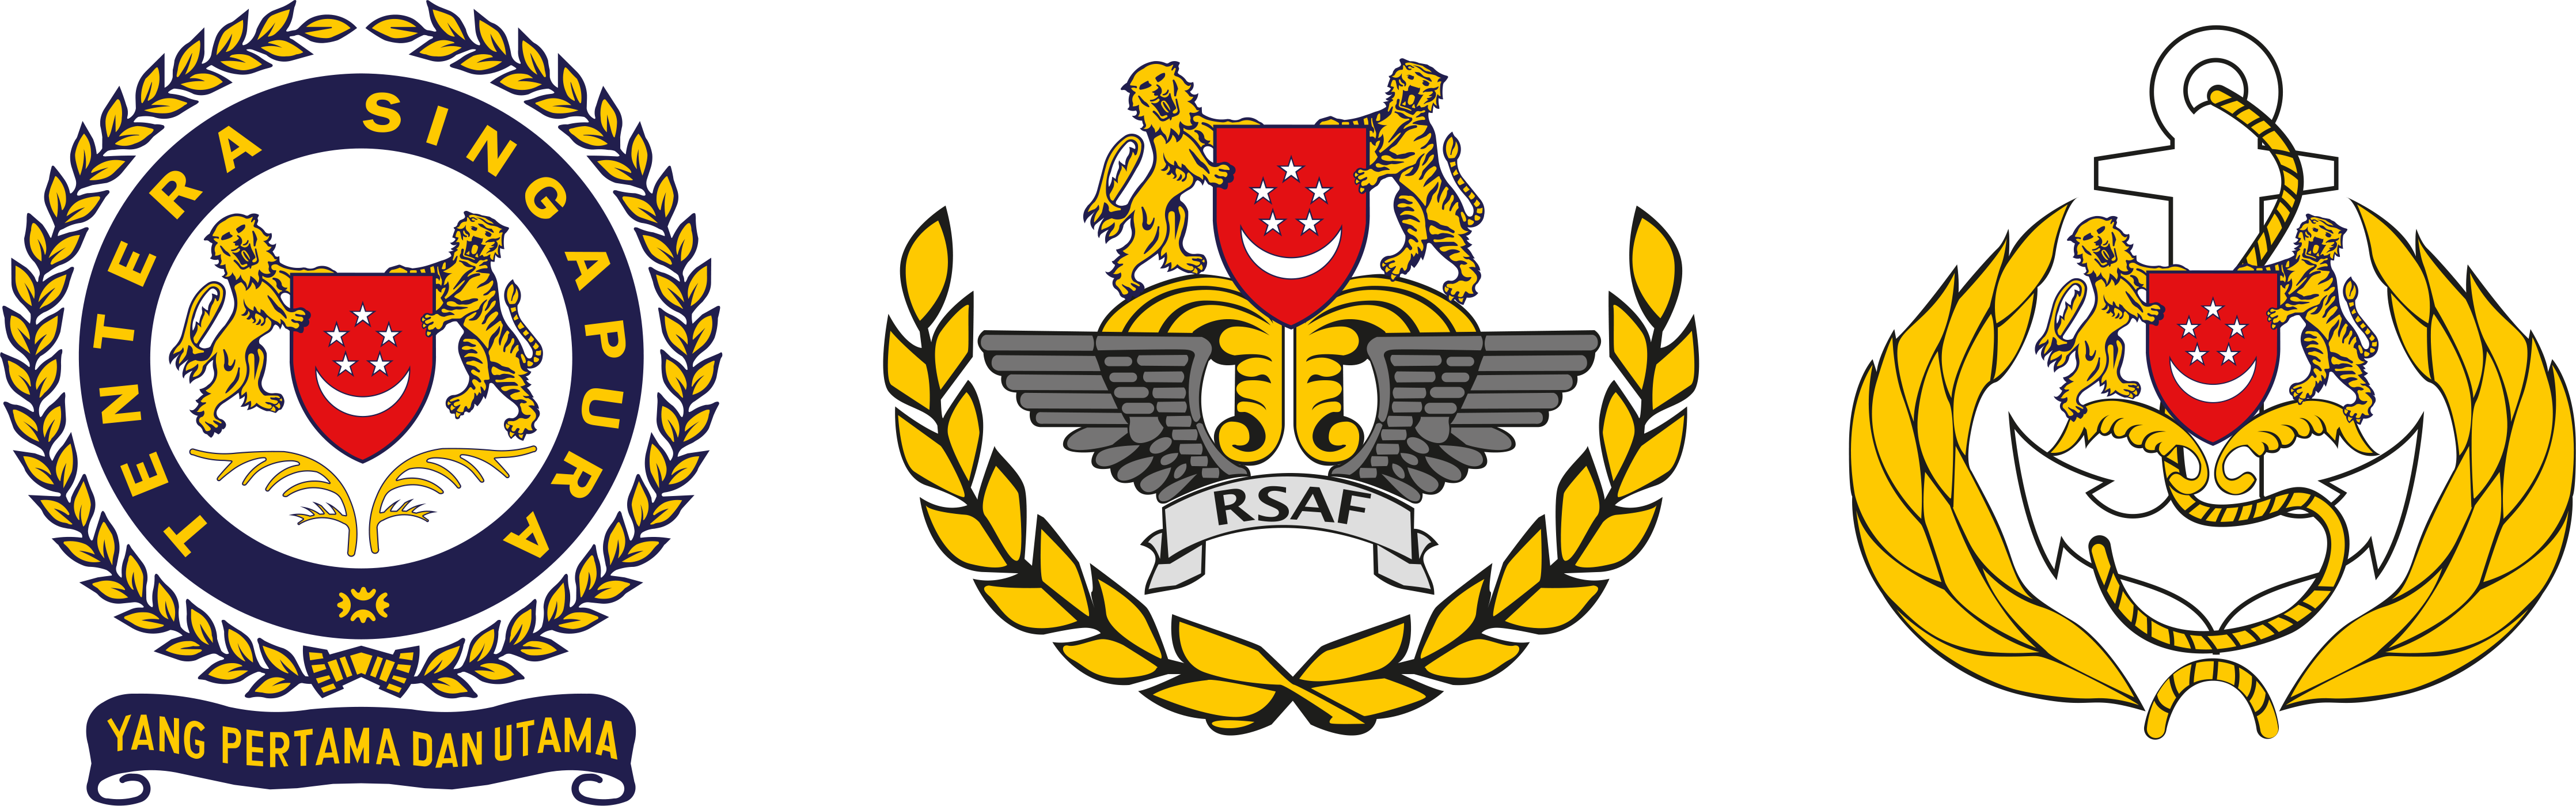 Force Army Of Singapore Air Republic Forces Clipart